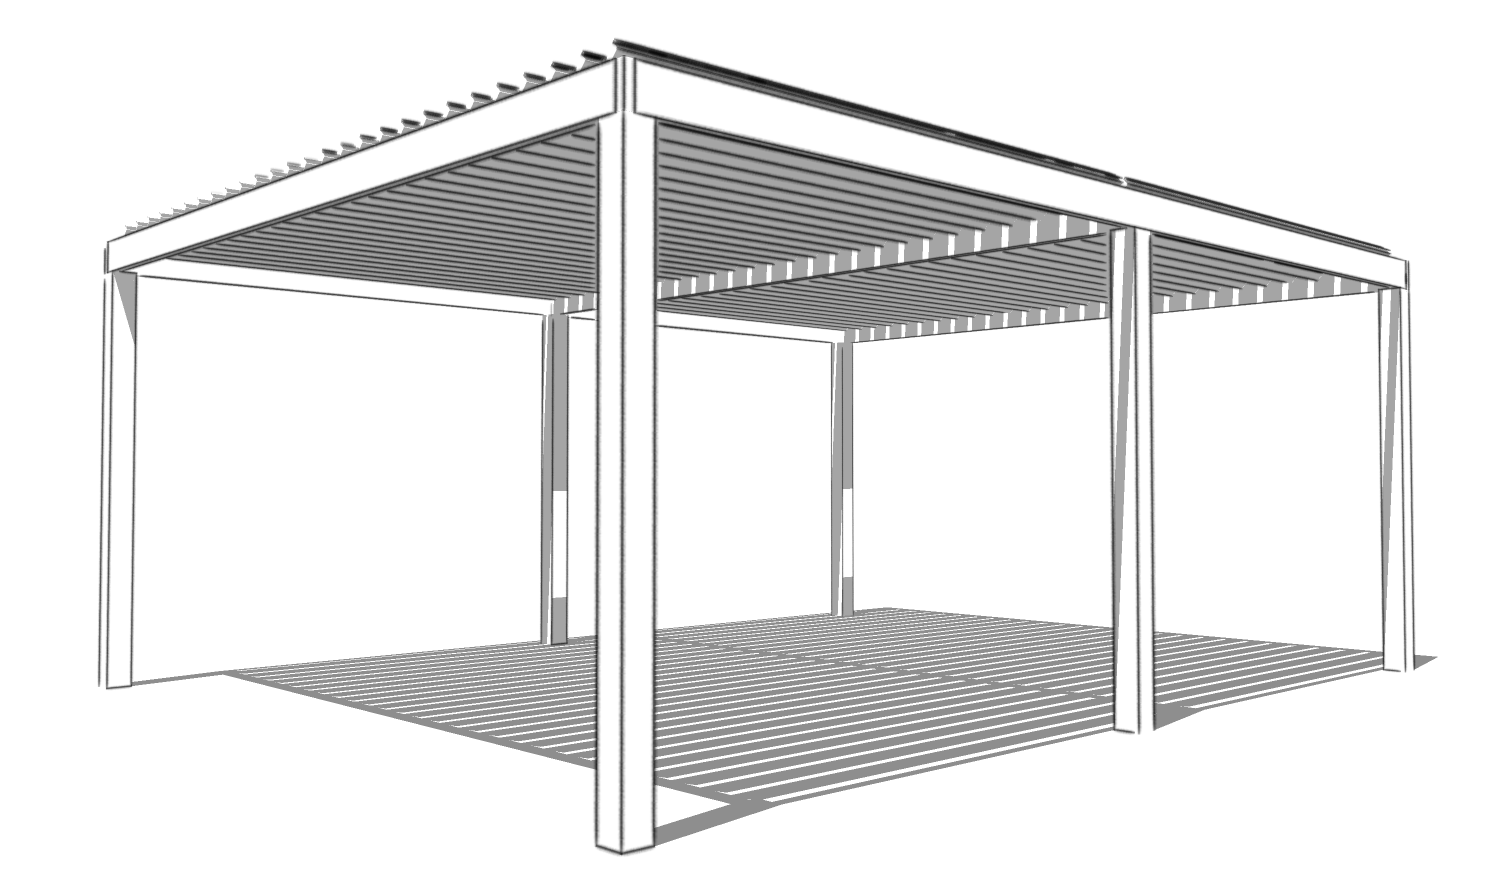 Sketch of a two-bay louvered pergola with open roof design.